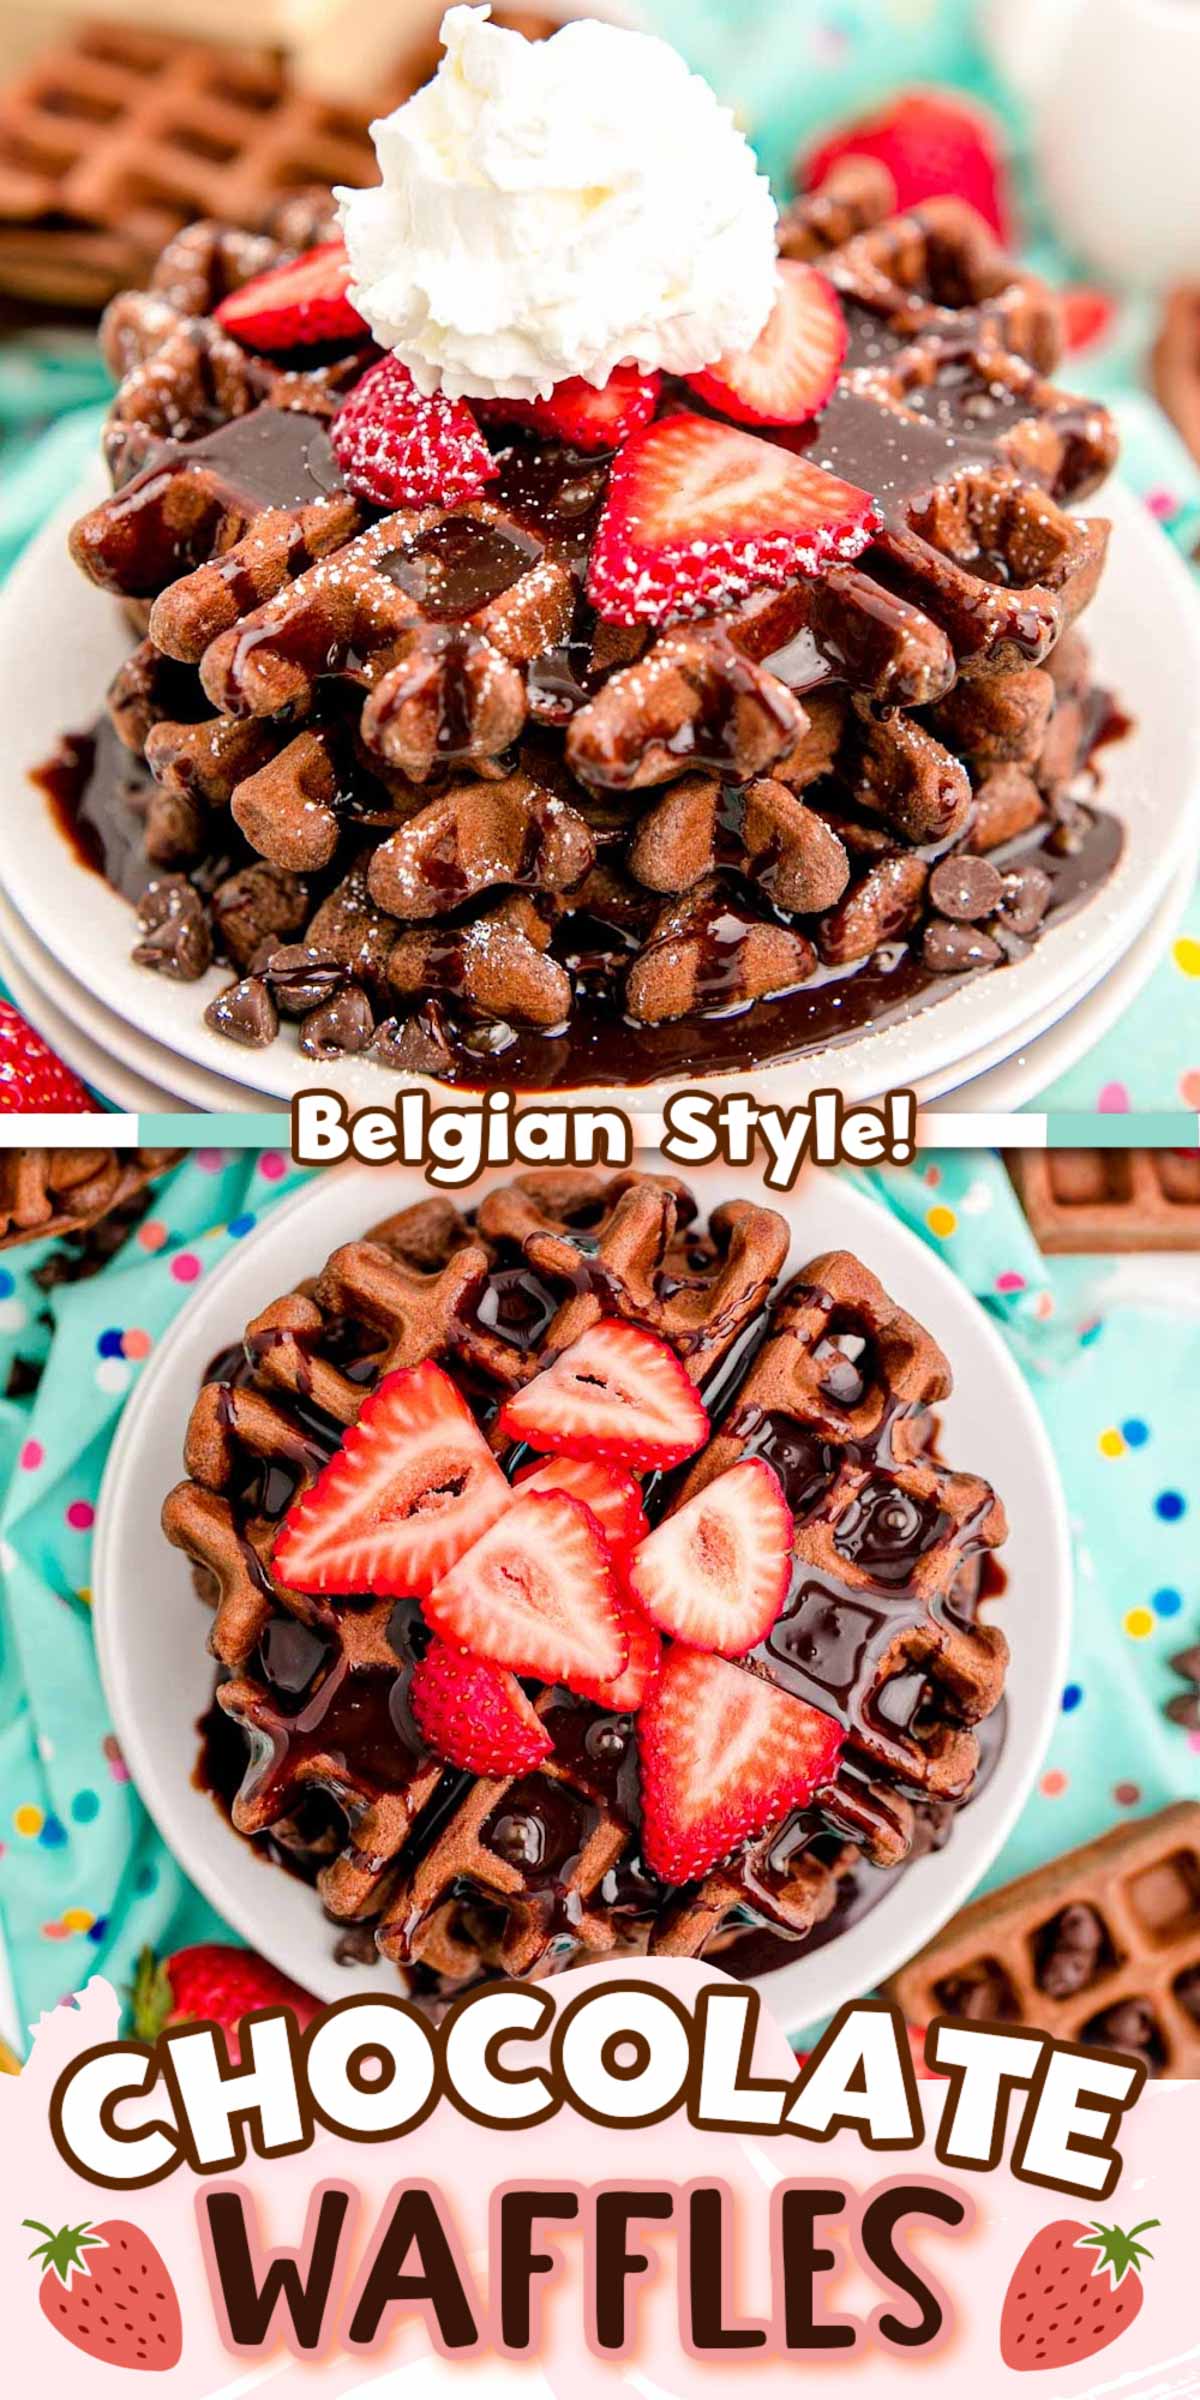 These Chocolate Waffles are made with simple pantry staple ingredients for a rich chocolate flavored twist on classic this classic breakfast dish! They're the perfect dessert-like breakfast! via @sugarandsoulco